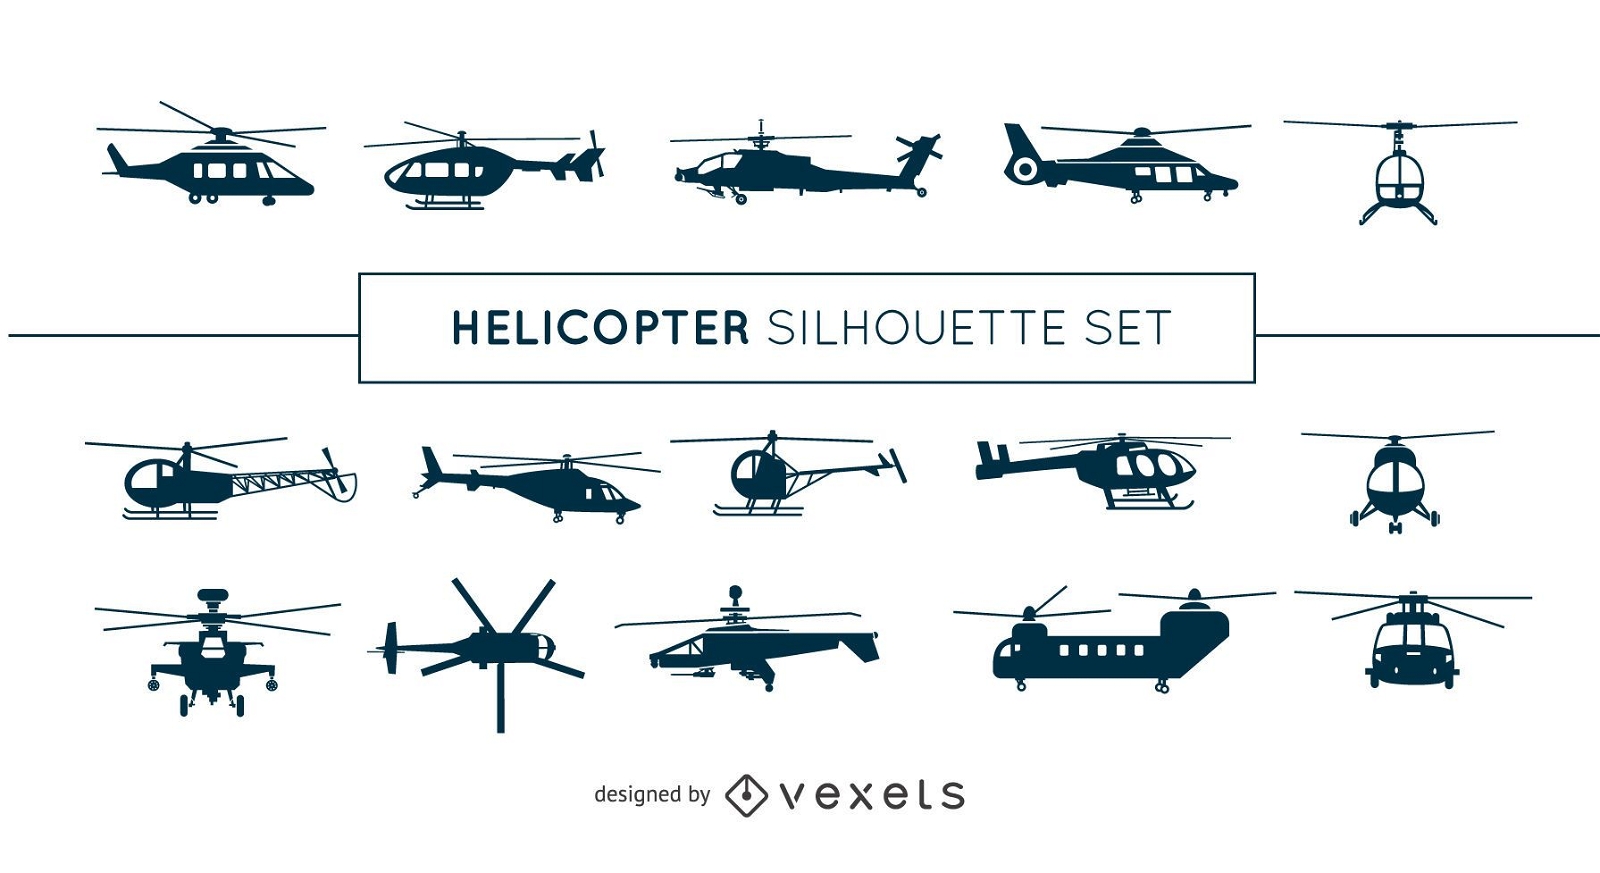 Helicopter silhouette set